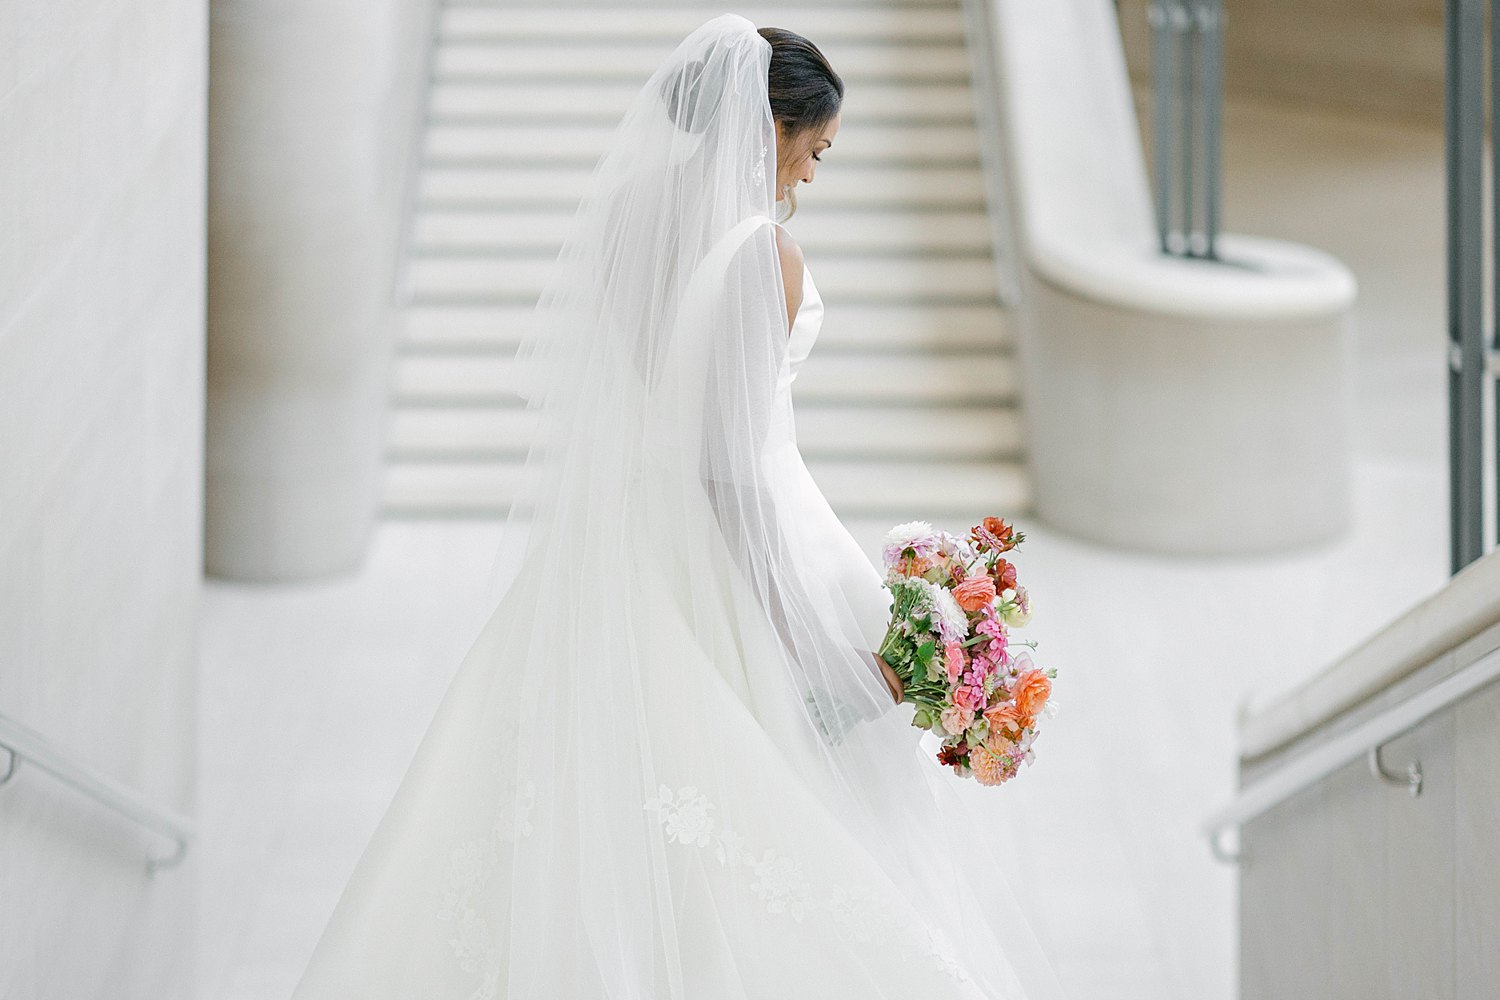 Bride in white wedding dress and veil holding colorful floral bouquet on top of staircase